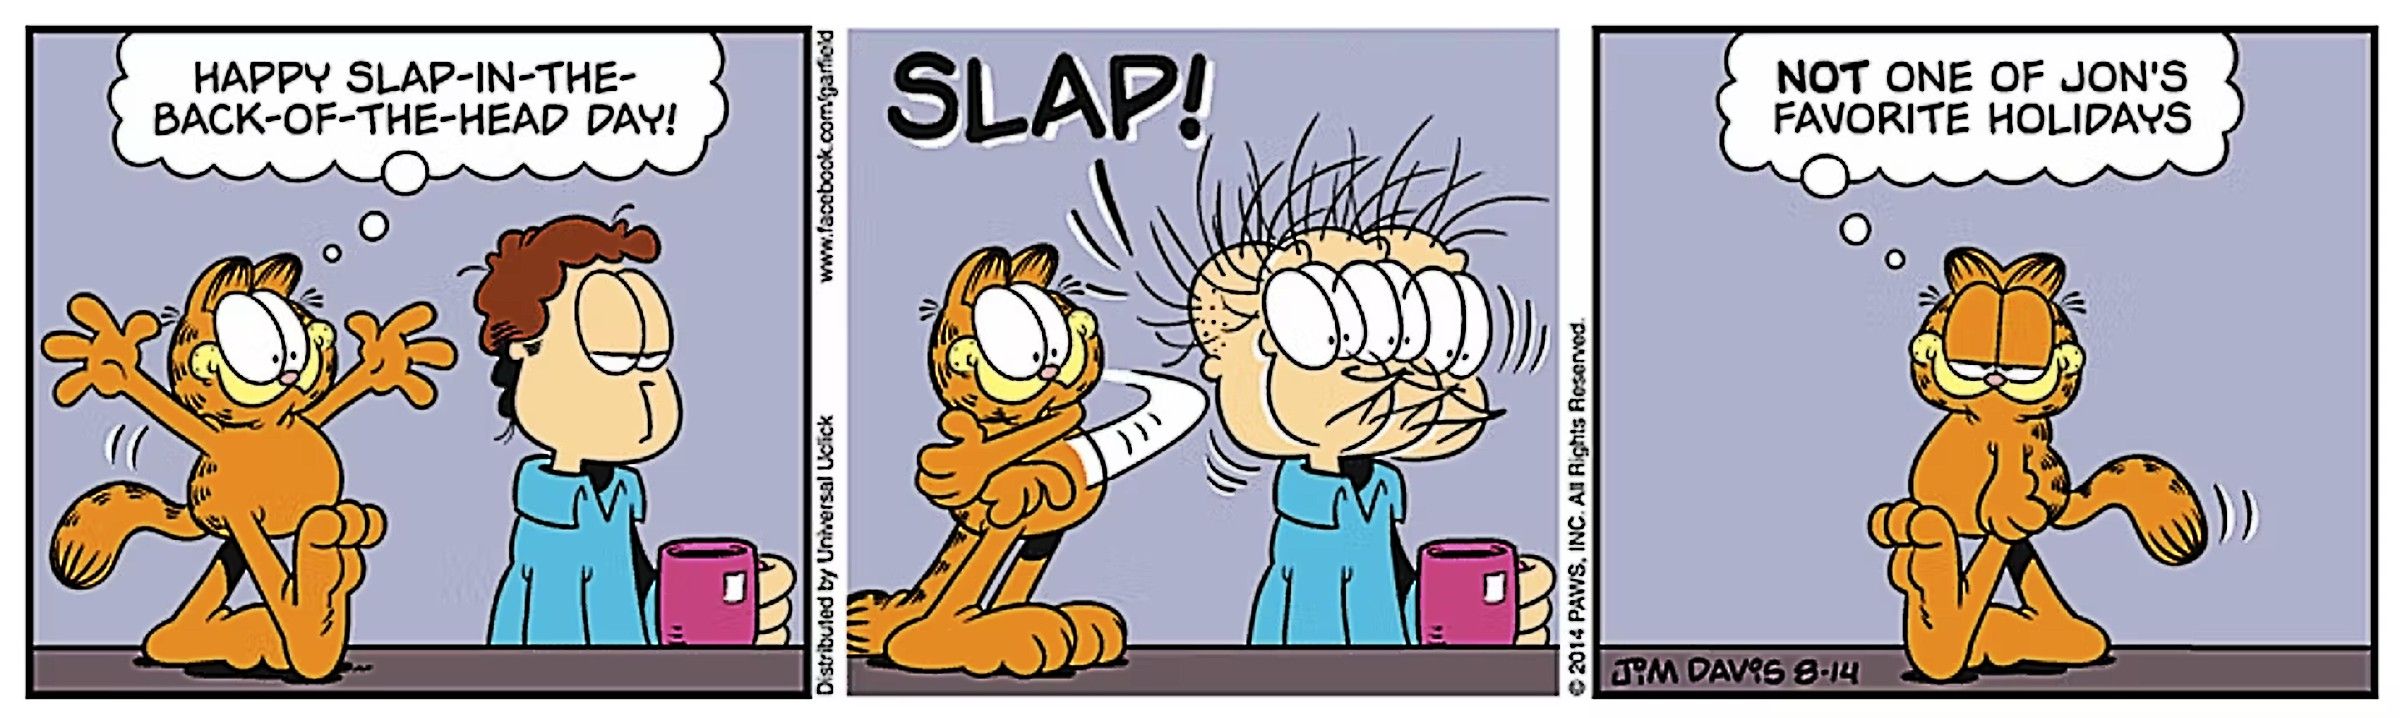 Garfield proclaims it is 